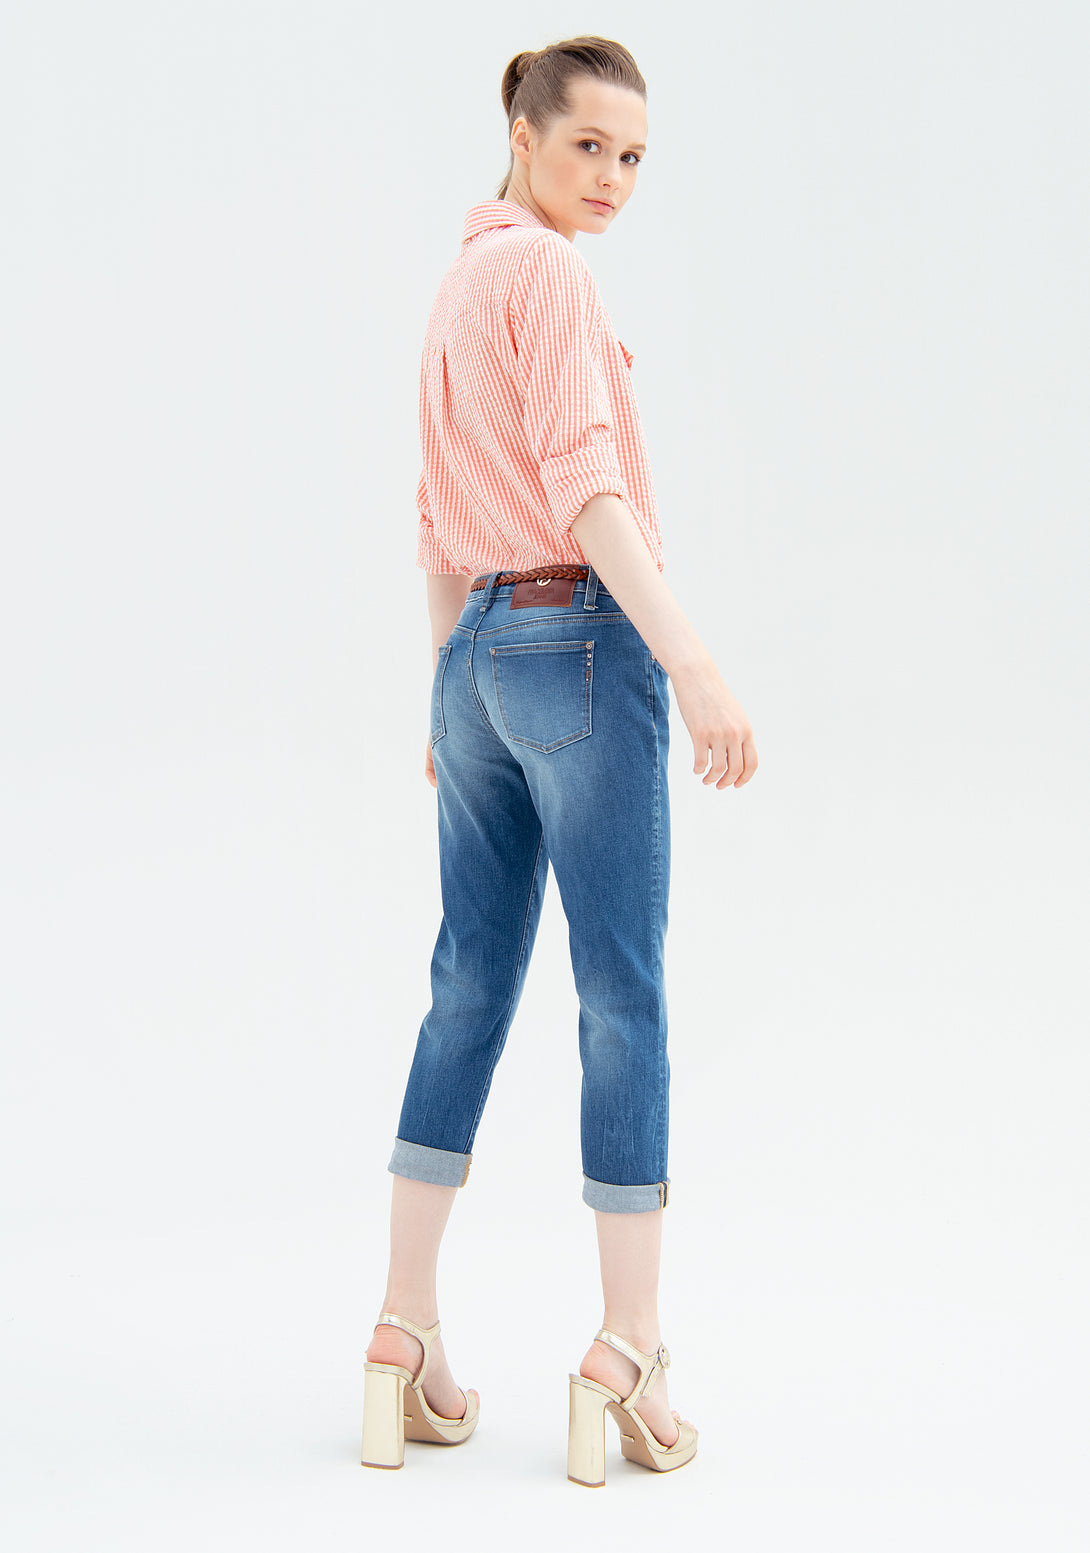 Jeans boyfriend fit cropped made in denim with middle wash